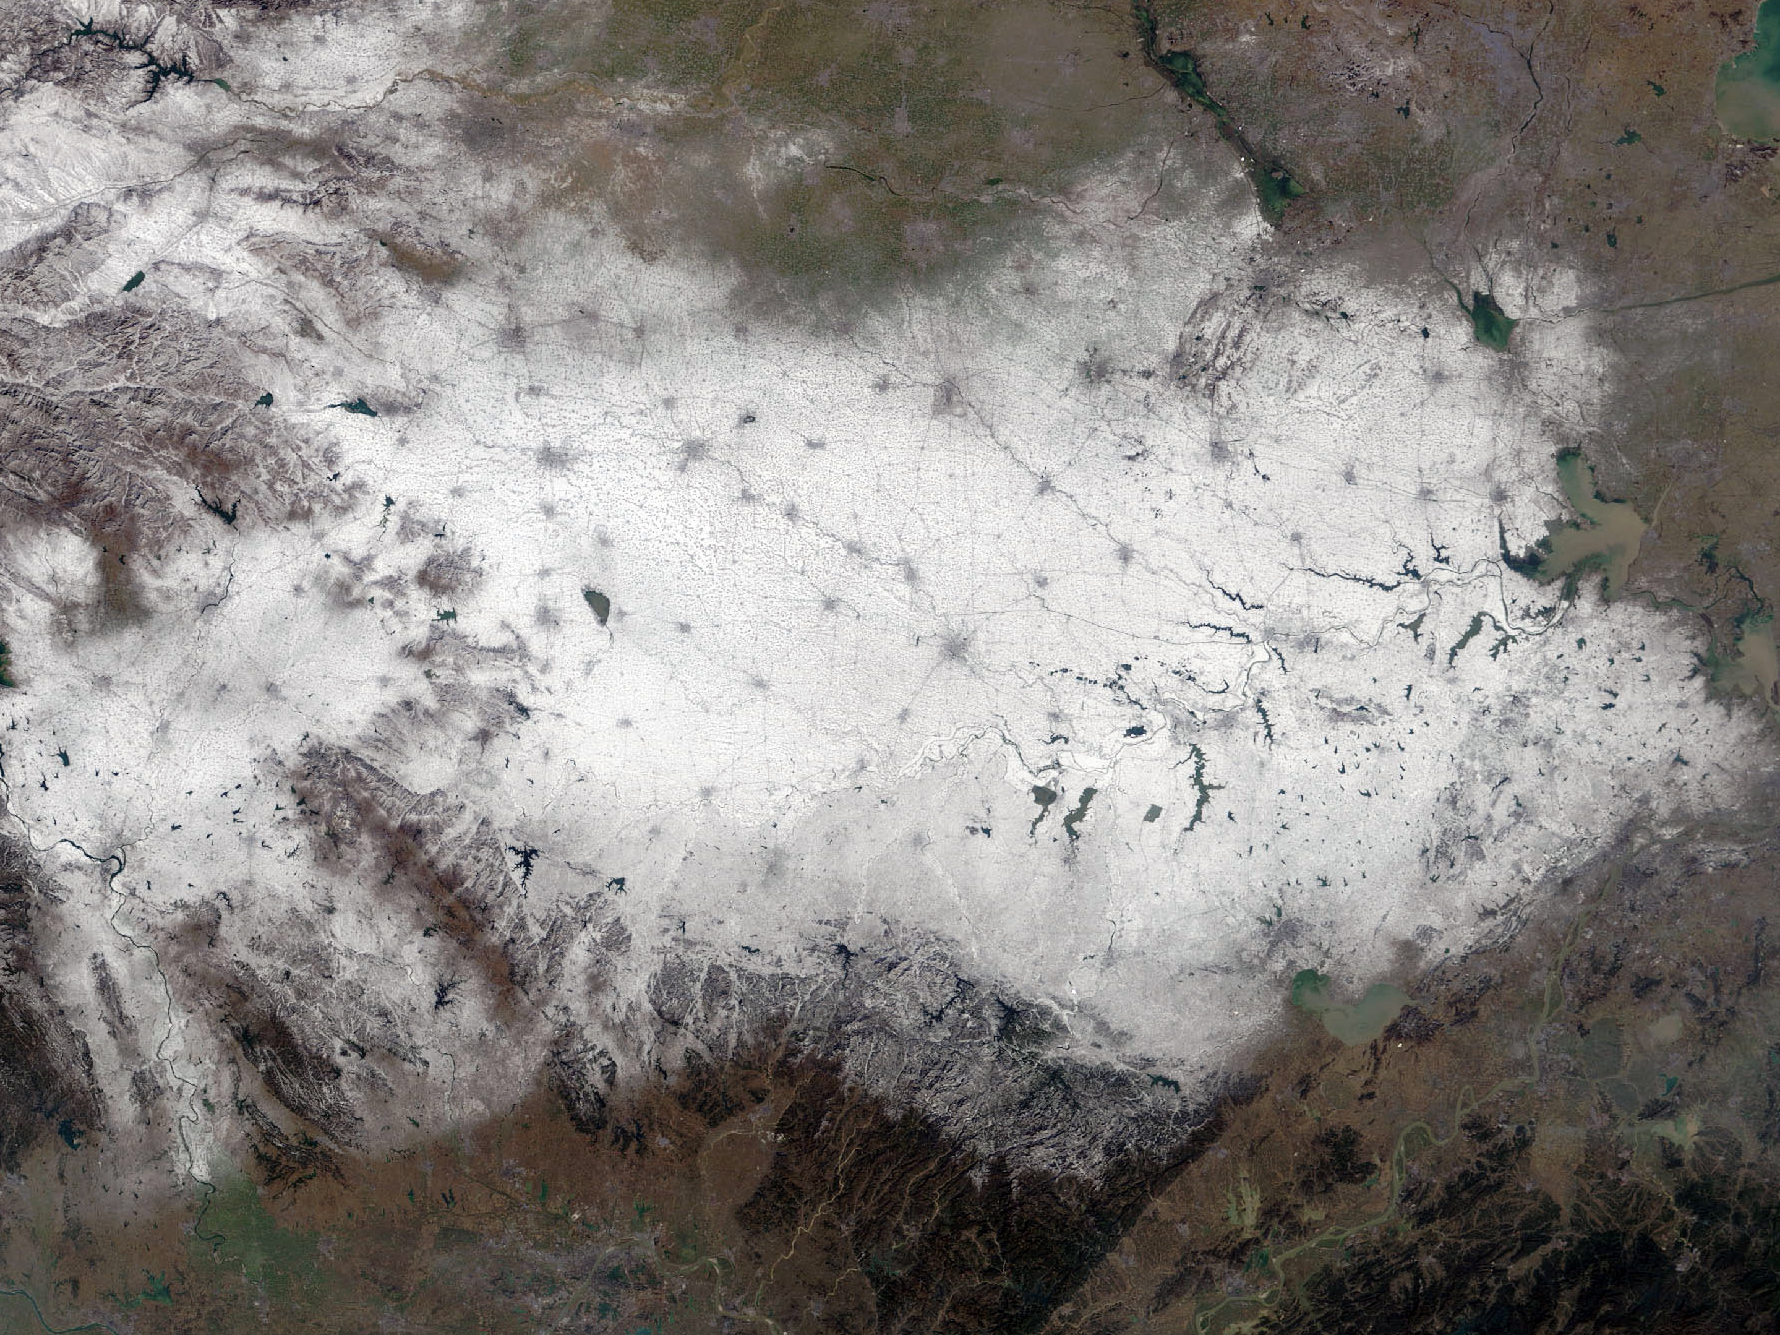 Snowfall in central china. Dark grey spots and lines are cities and roads.